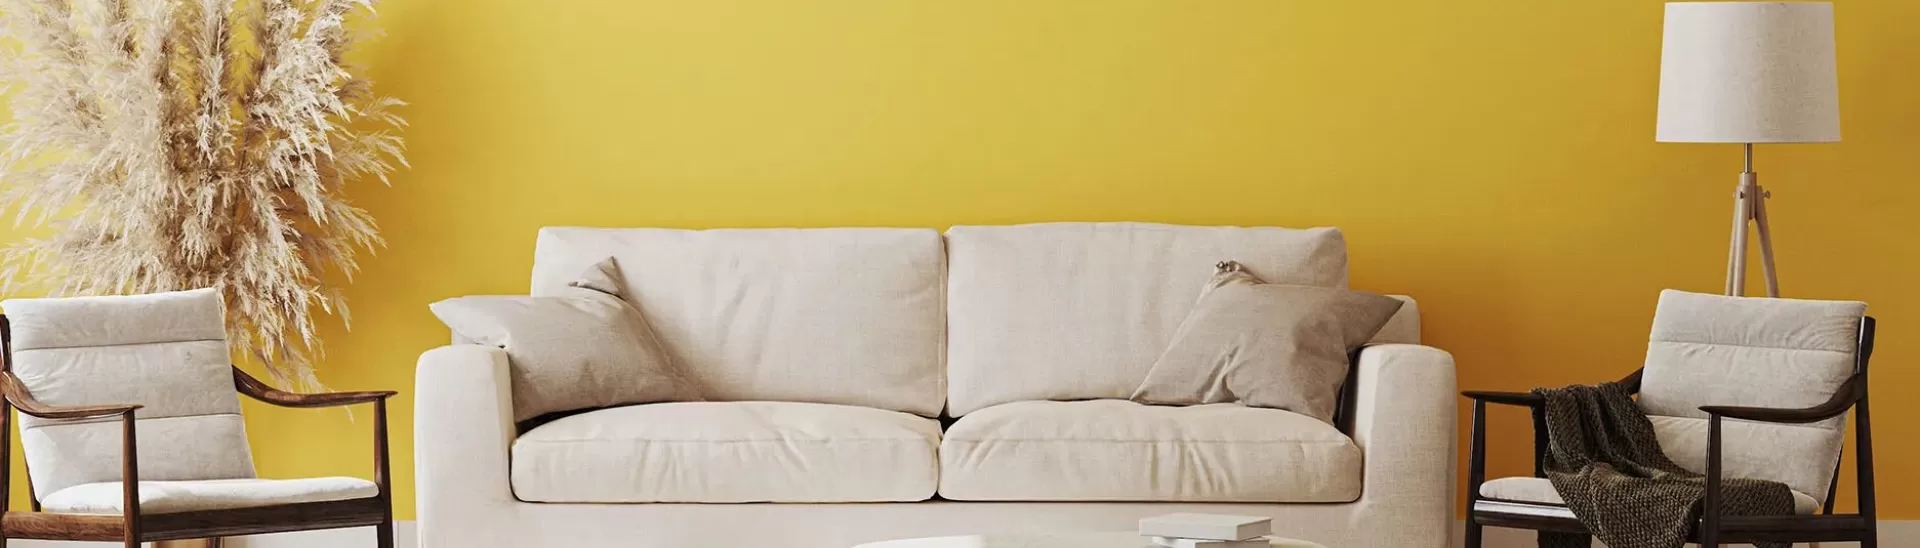 Top 10 Beautiful Colour Combinations with Yellow for Home - Nerolac